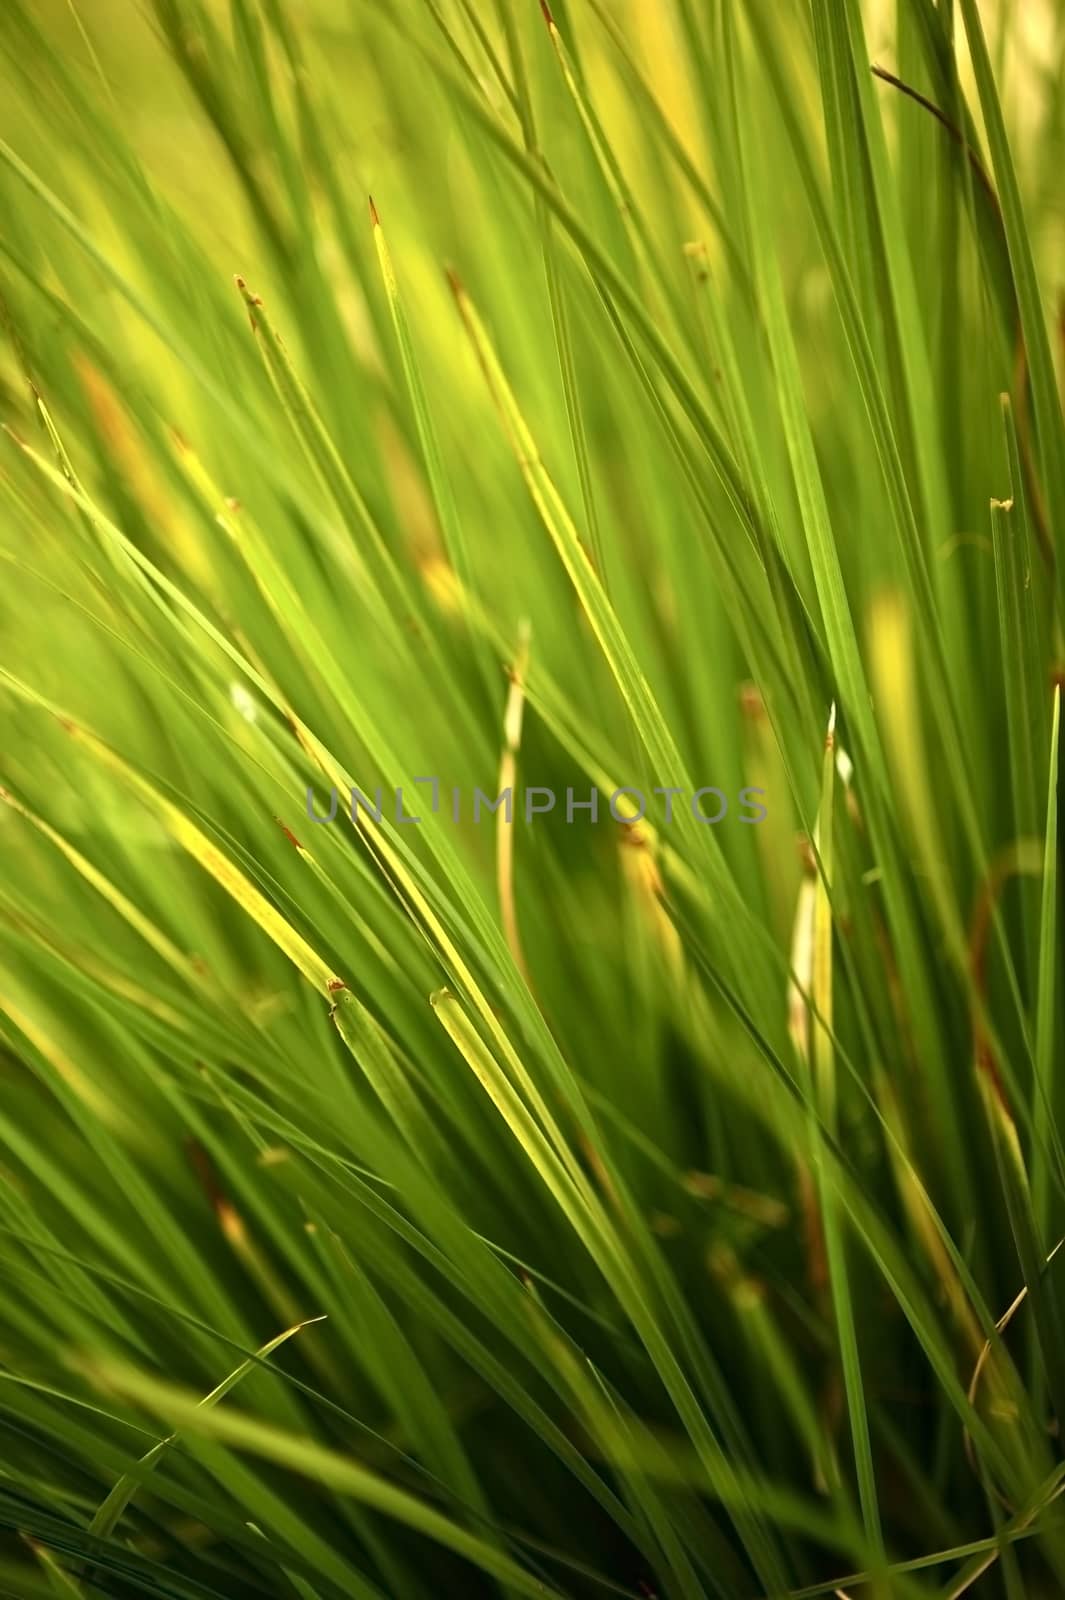 Spring Grasses by welcomia